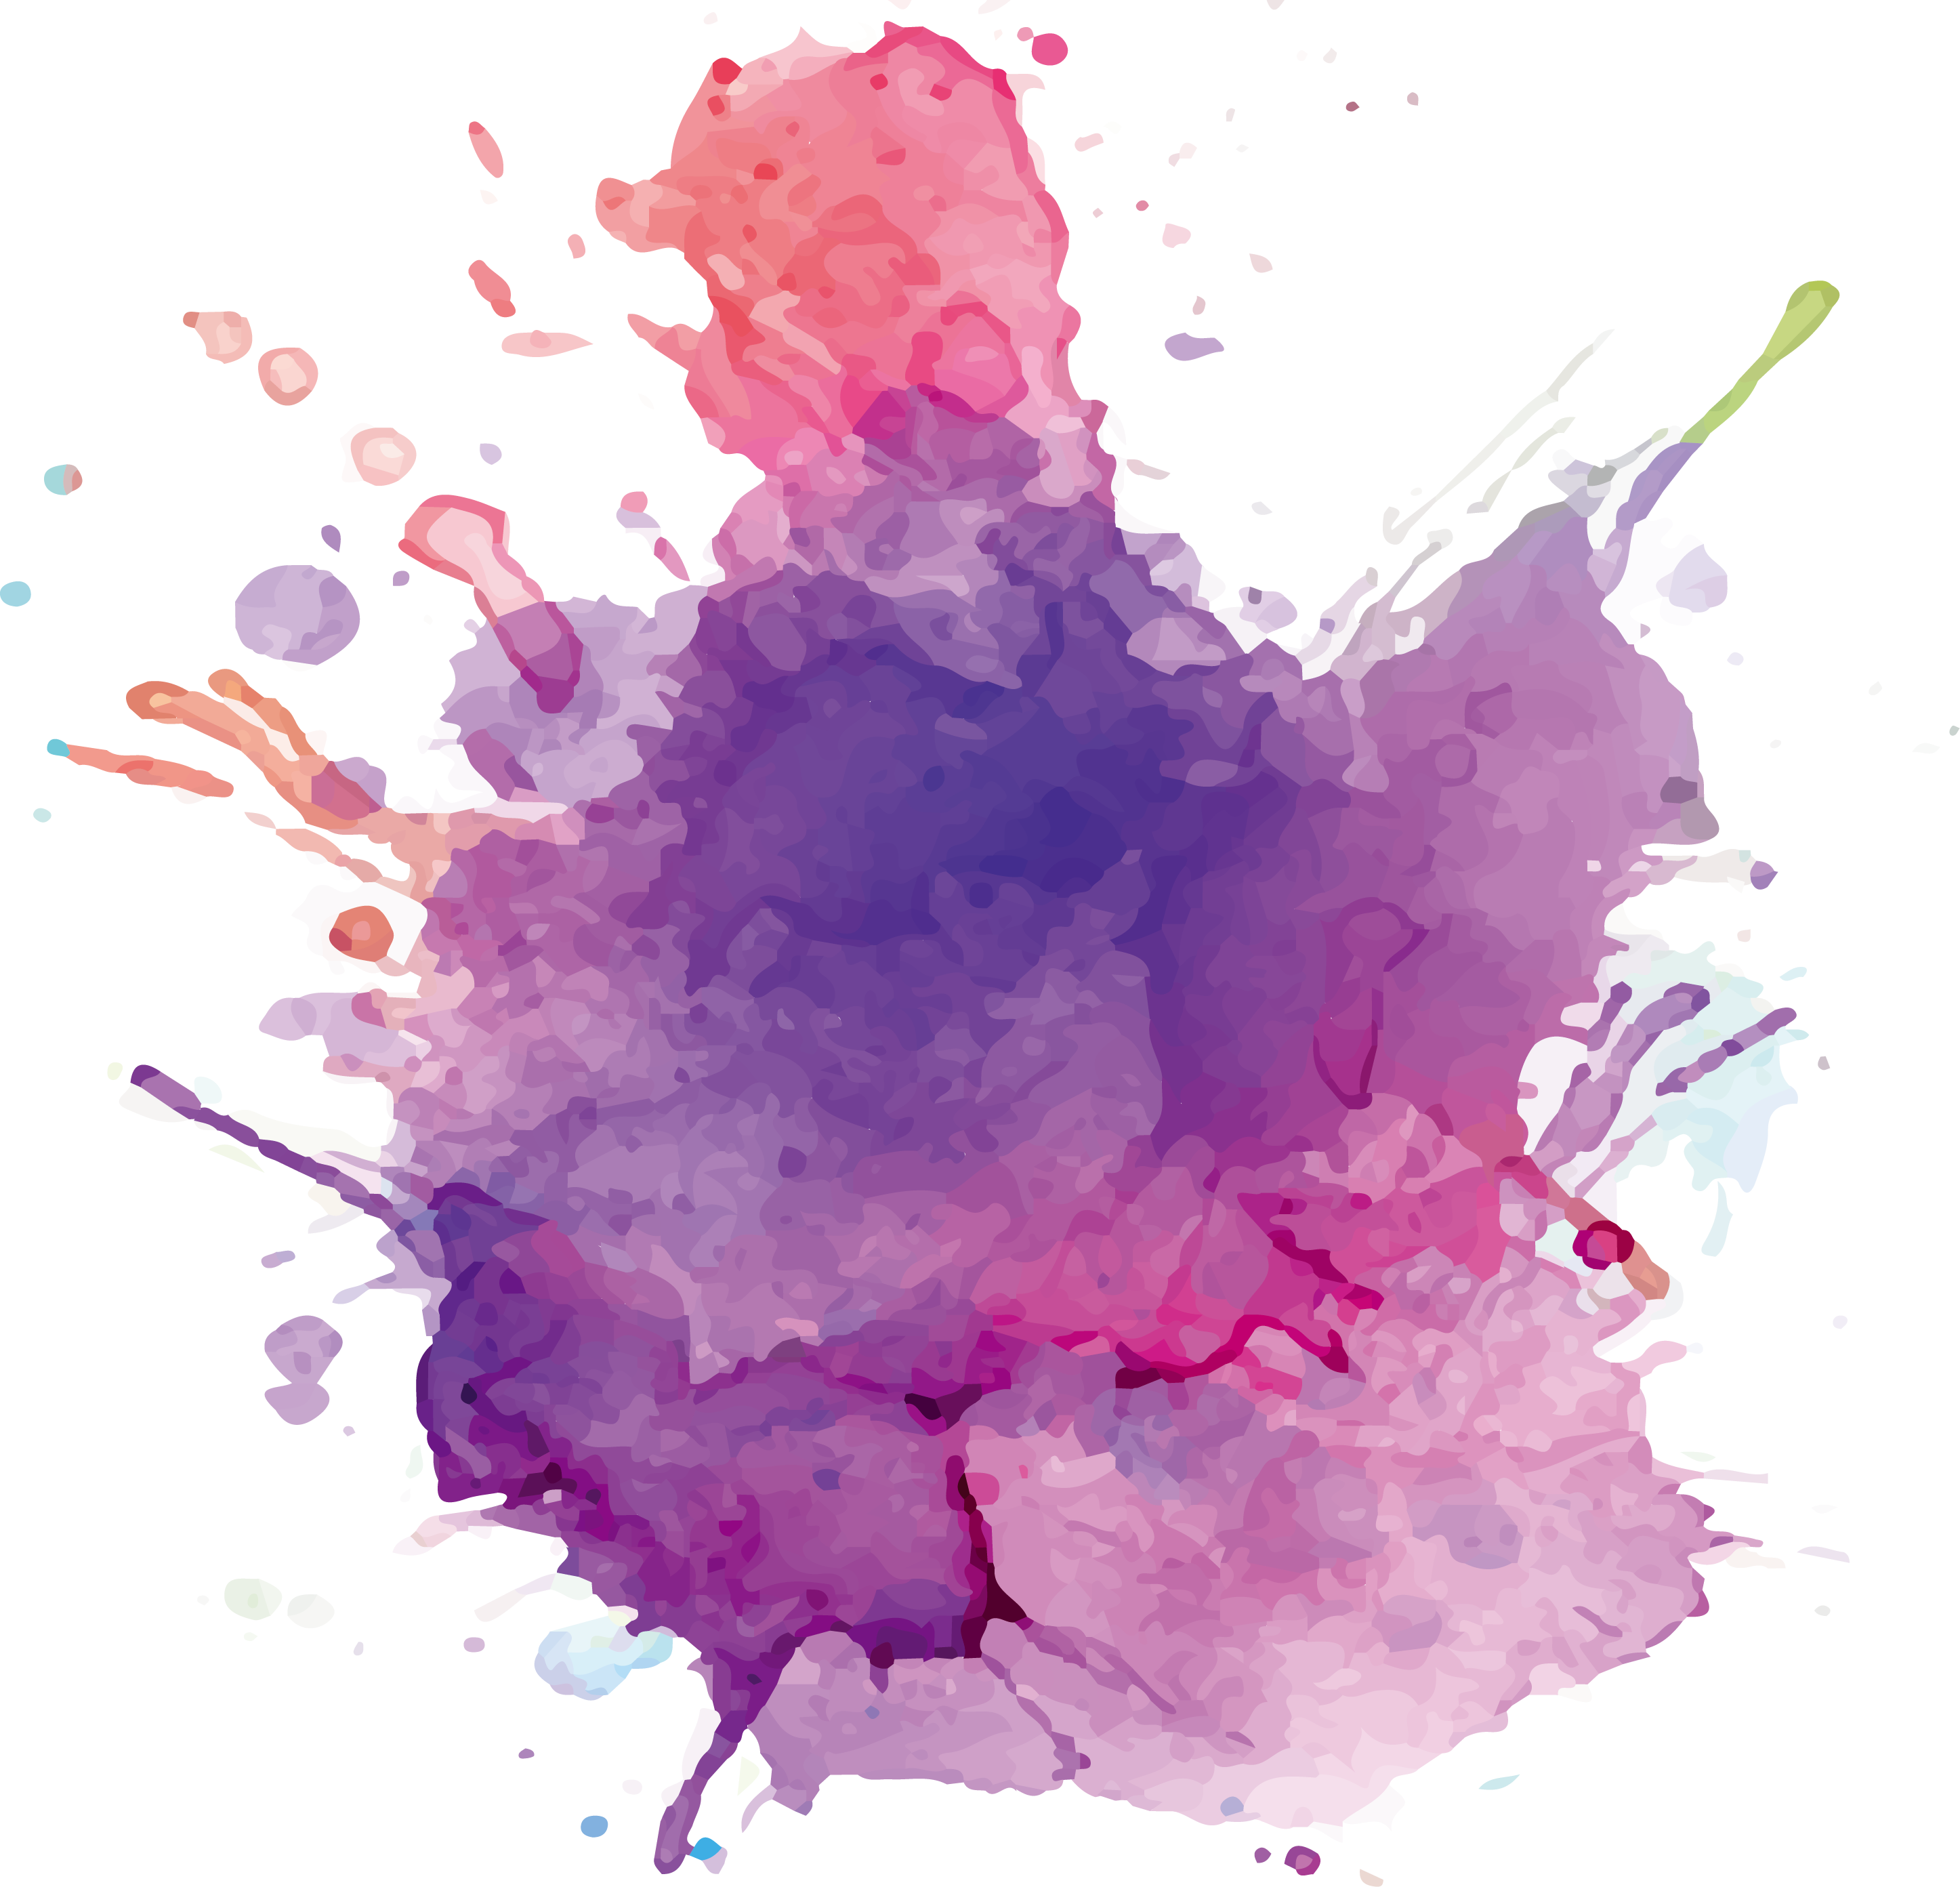 Paint Splash Ink Brush Watercolor Png Transparent Clipart Image And